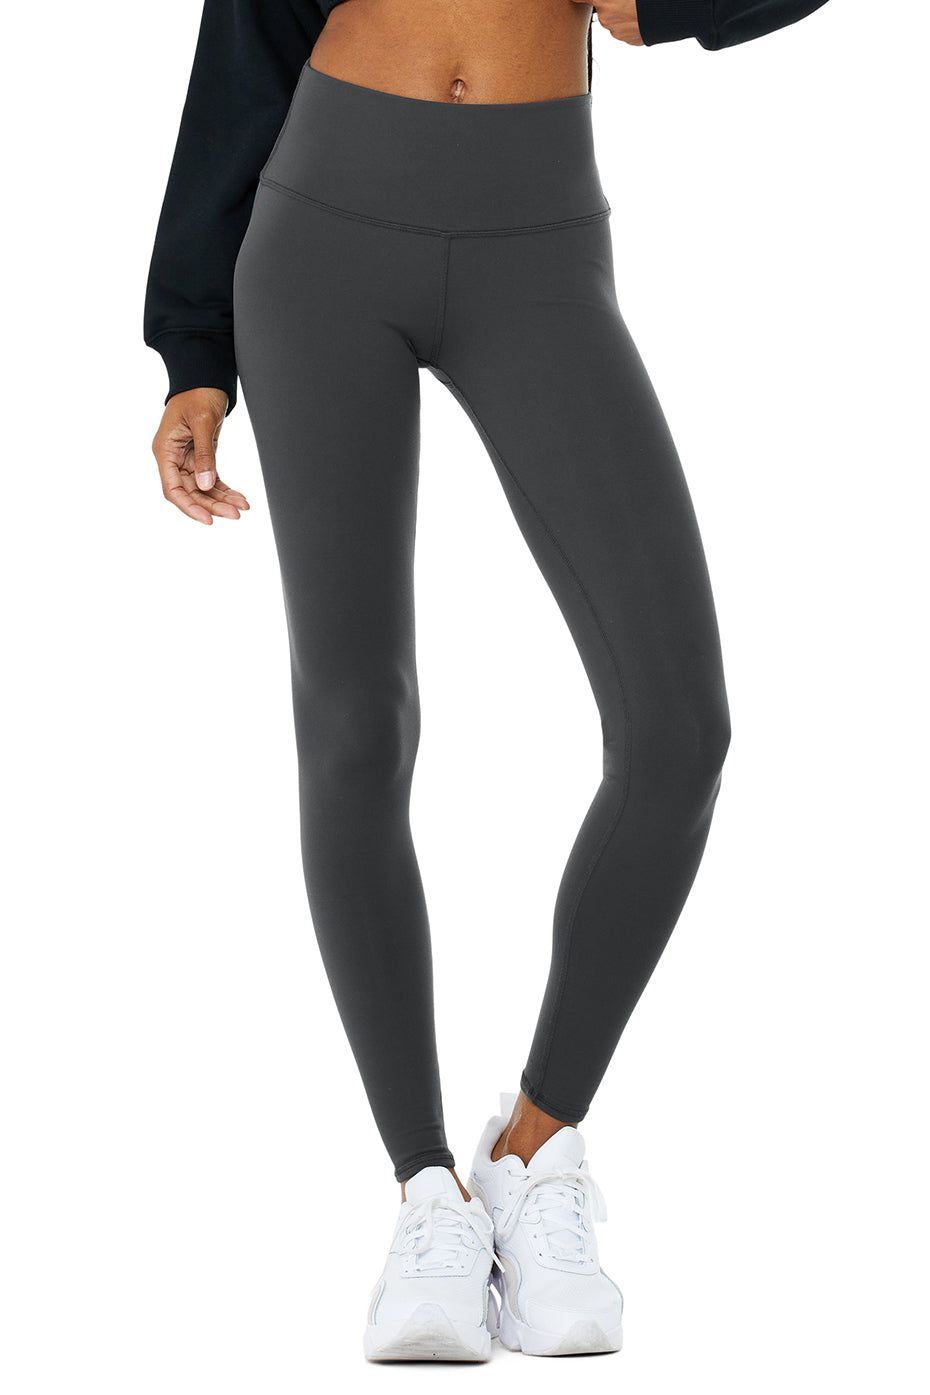 MASKERT Women's Fleece Lined Leggings Water Resistant High Waisted Thermal  Hiking Warm Pants Athletic Running Tights Cold Weather, Dark Grey, X-Small  at  Women's Clothing store